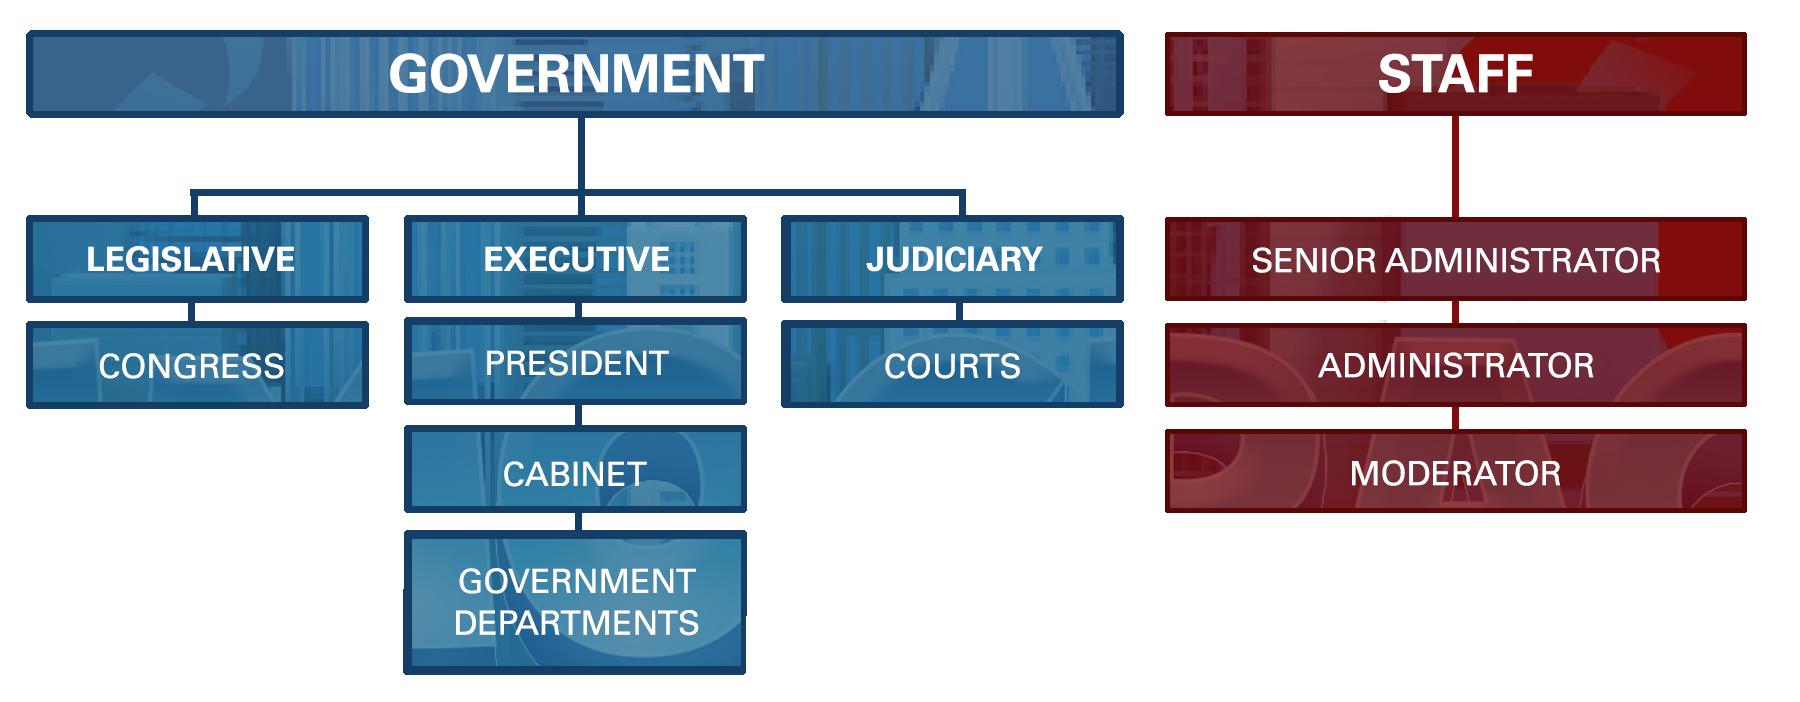 government-breakdown-png.5